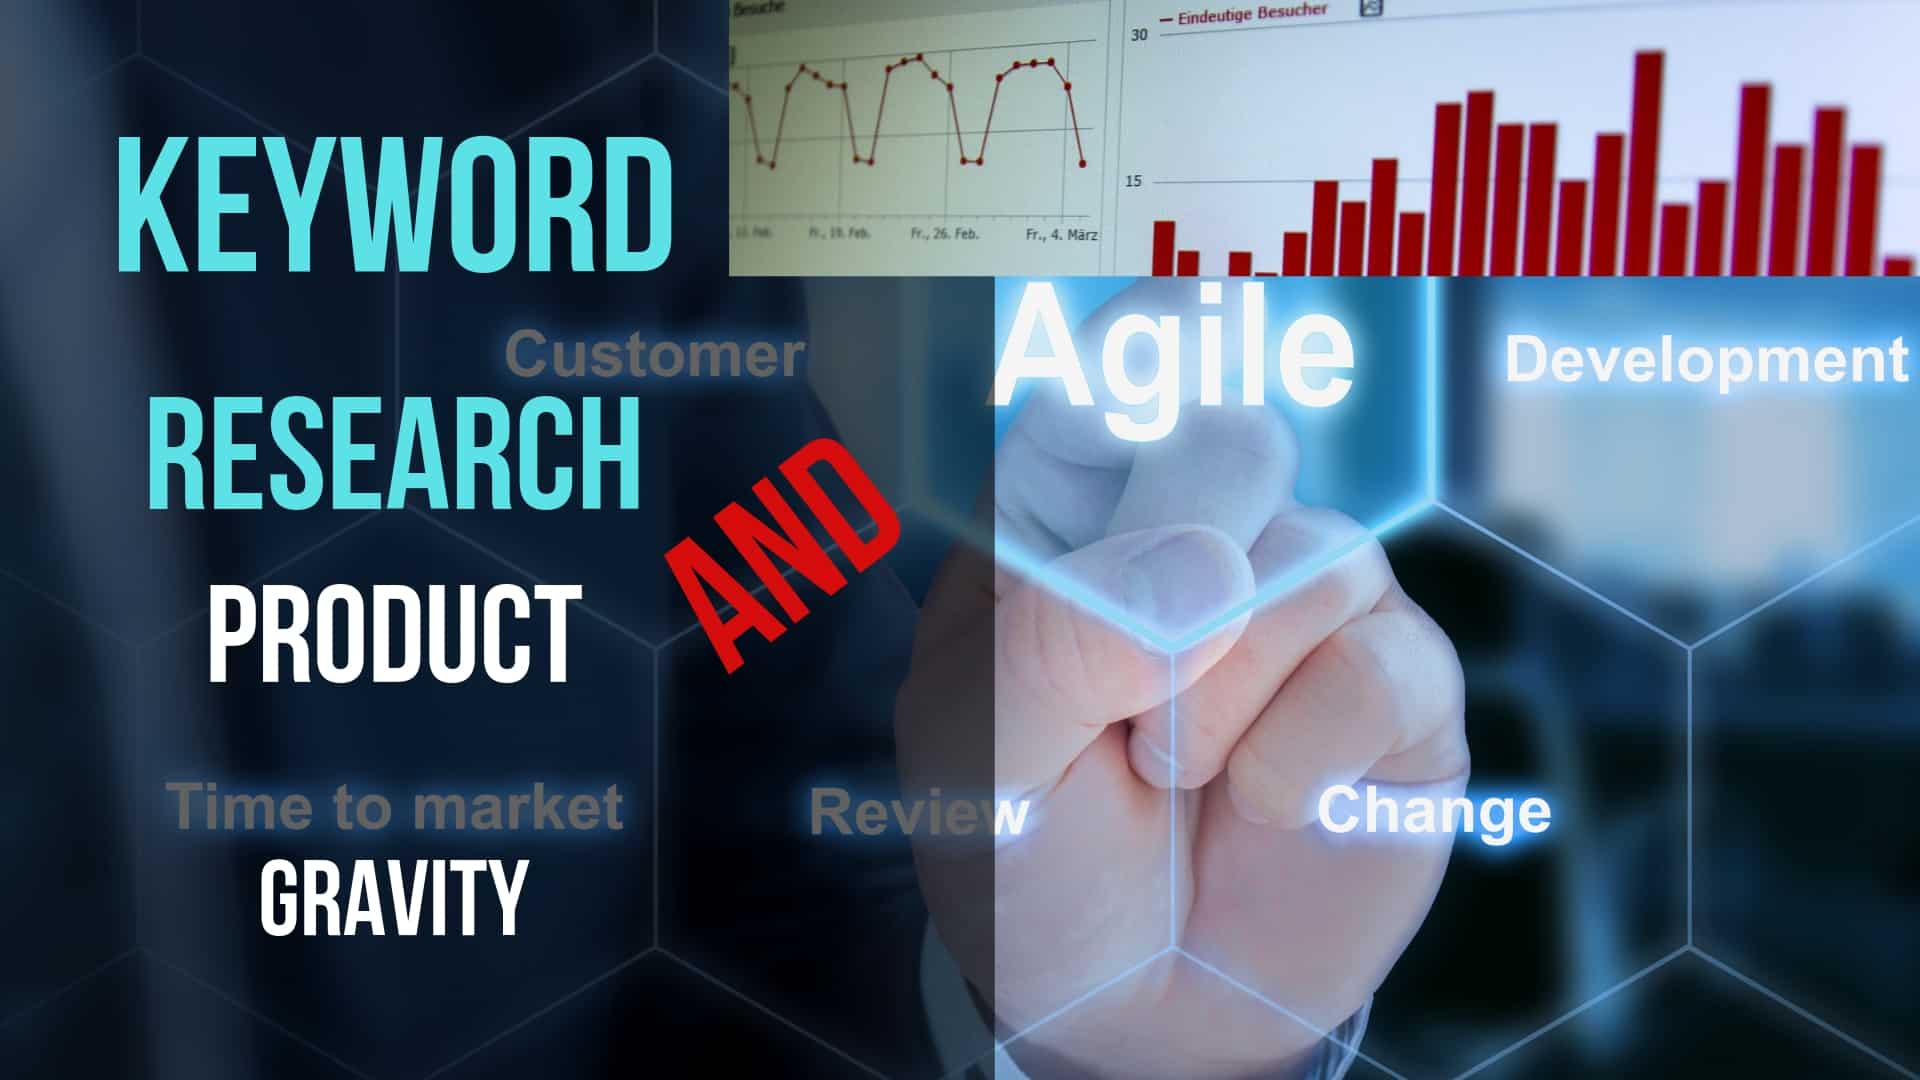 Keyword research and product gravity